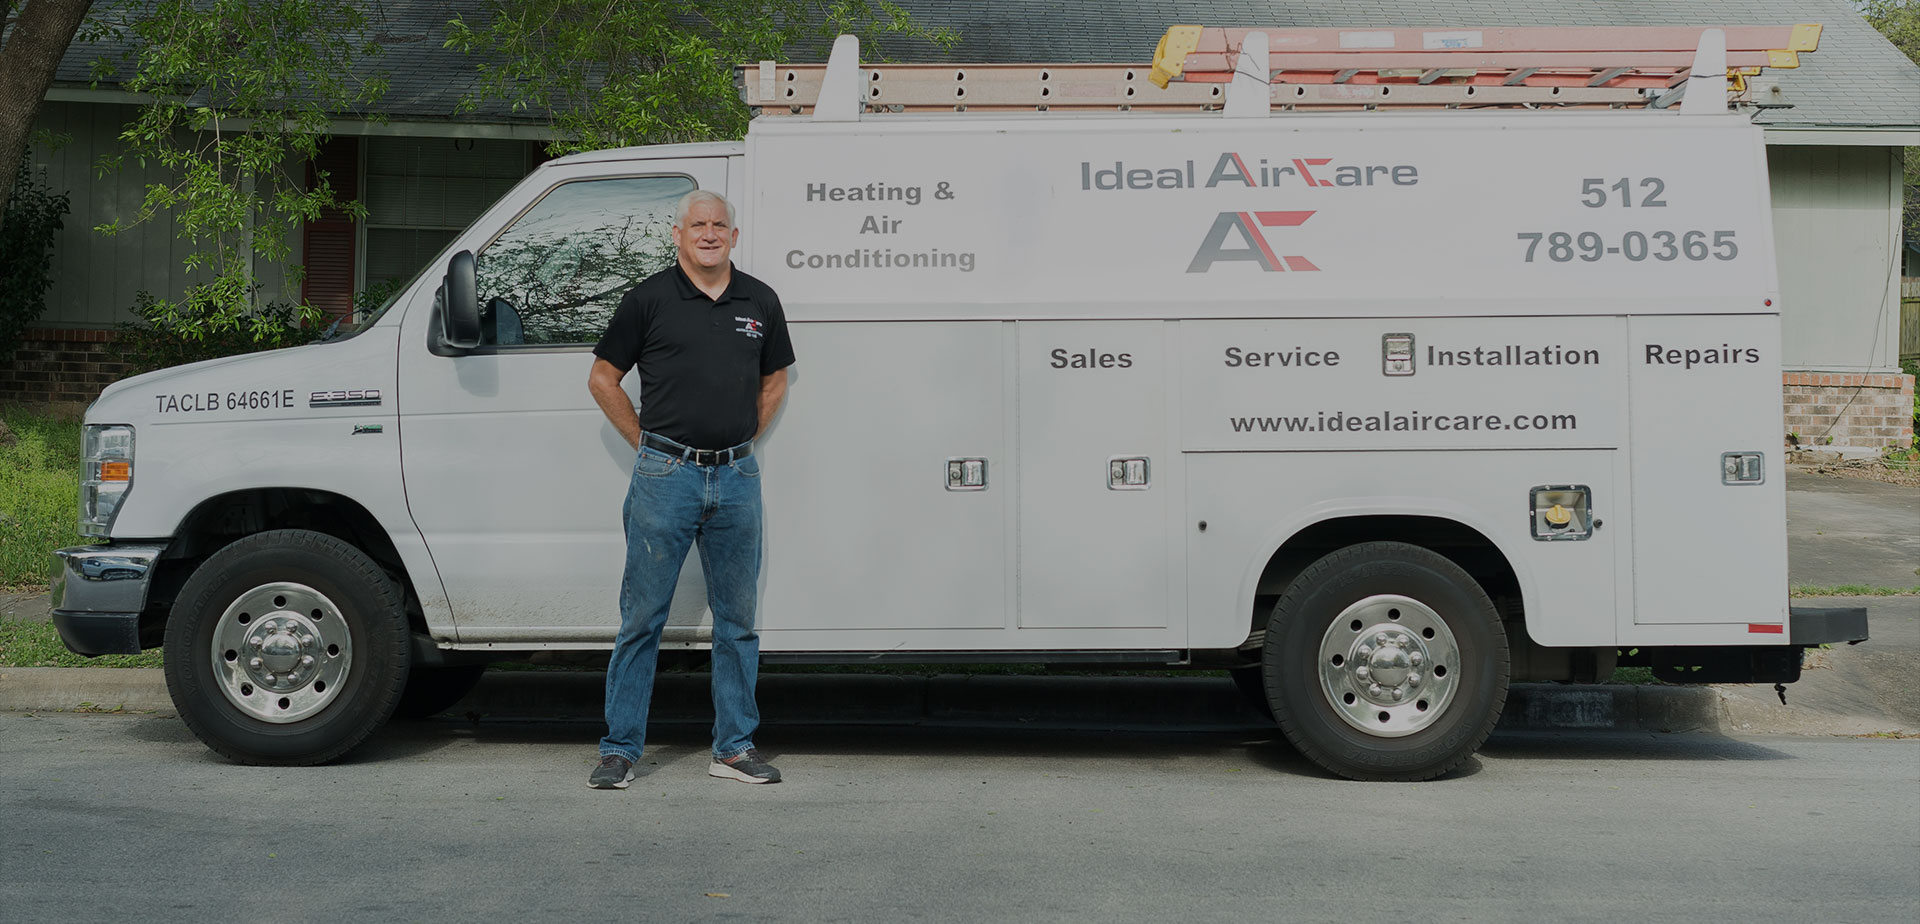 Ideal AirCare